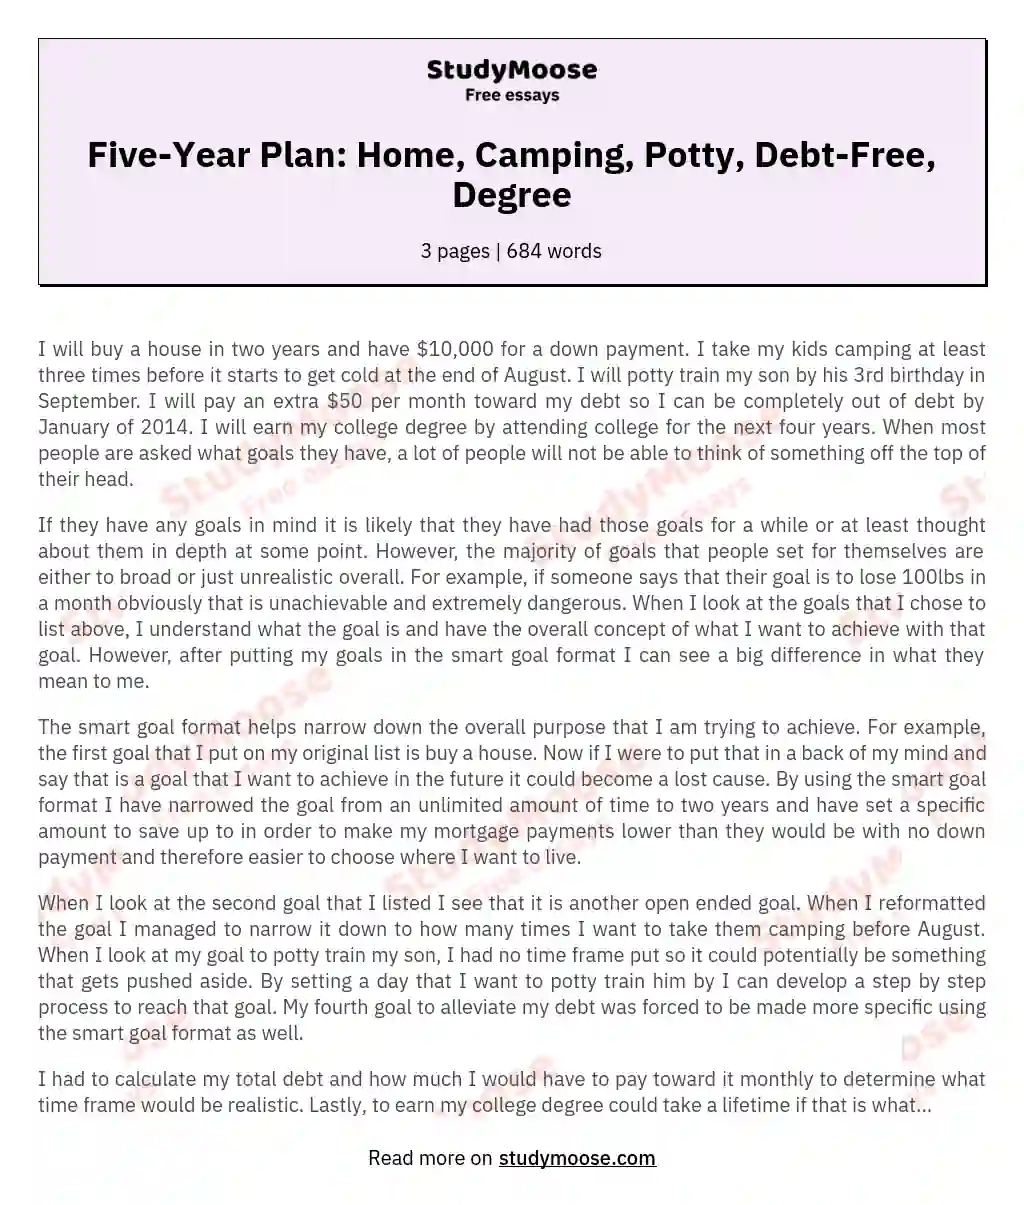 Five-Year Plan: Home, Camping, Potty, Debt-Free, Degree